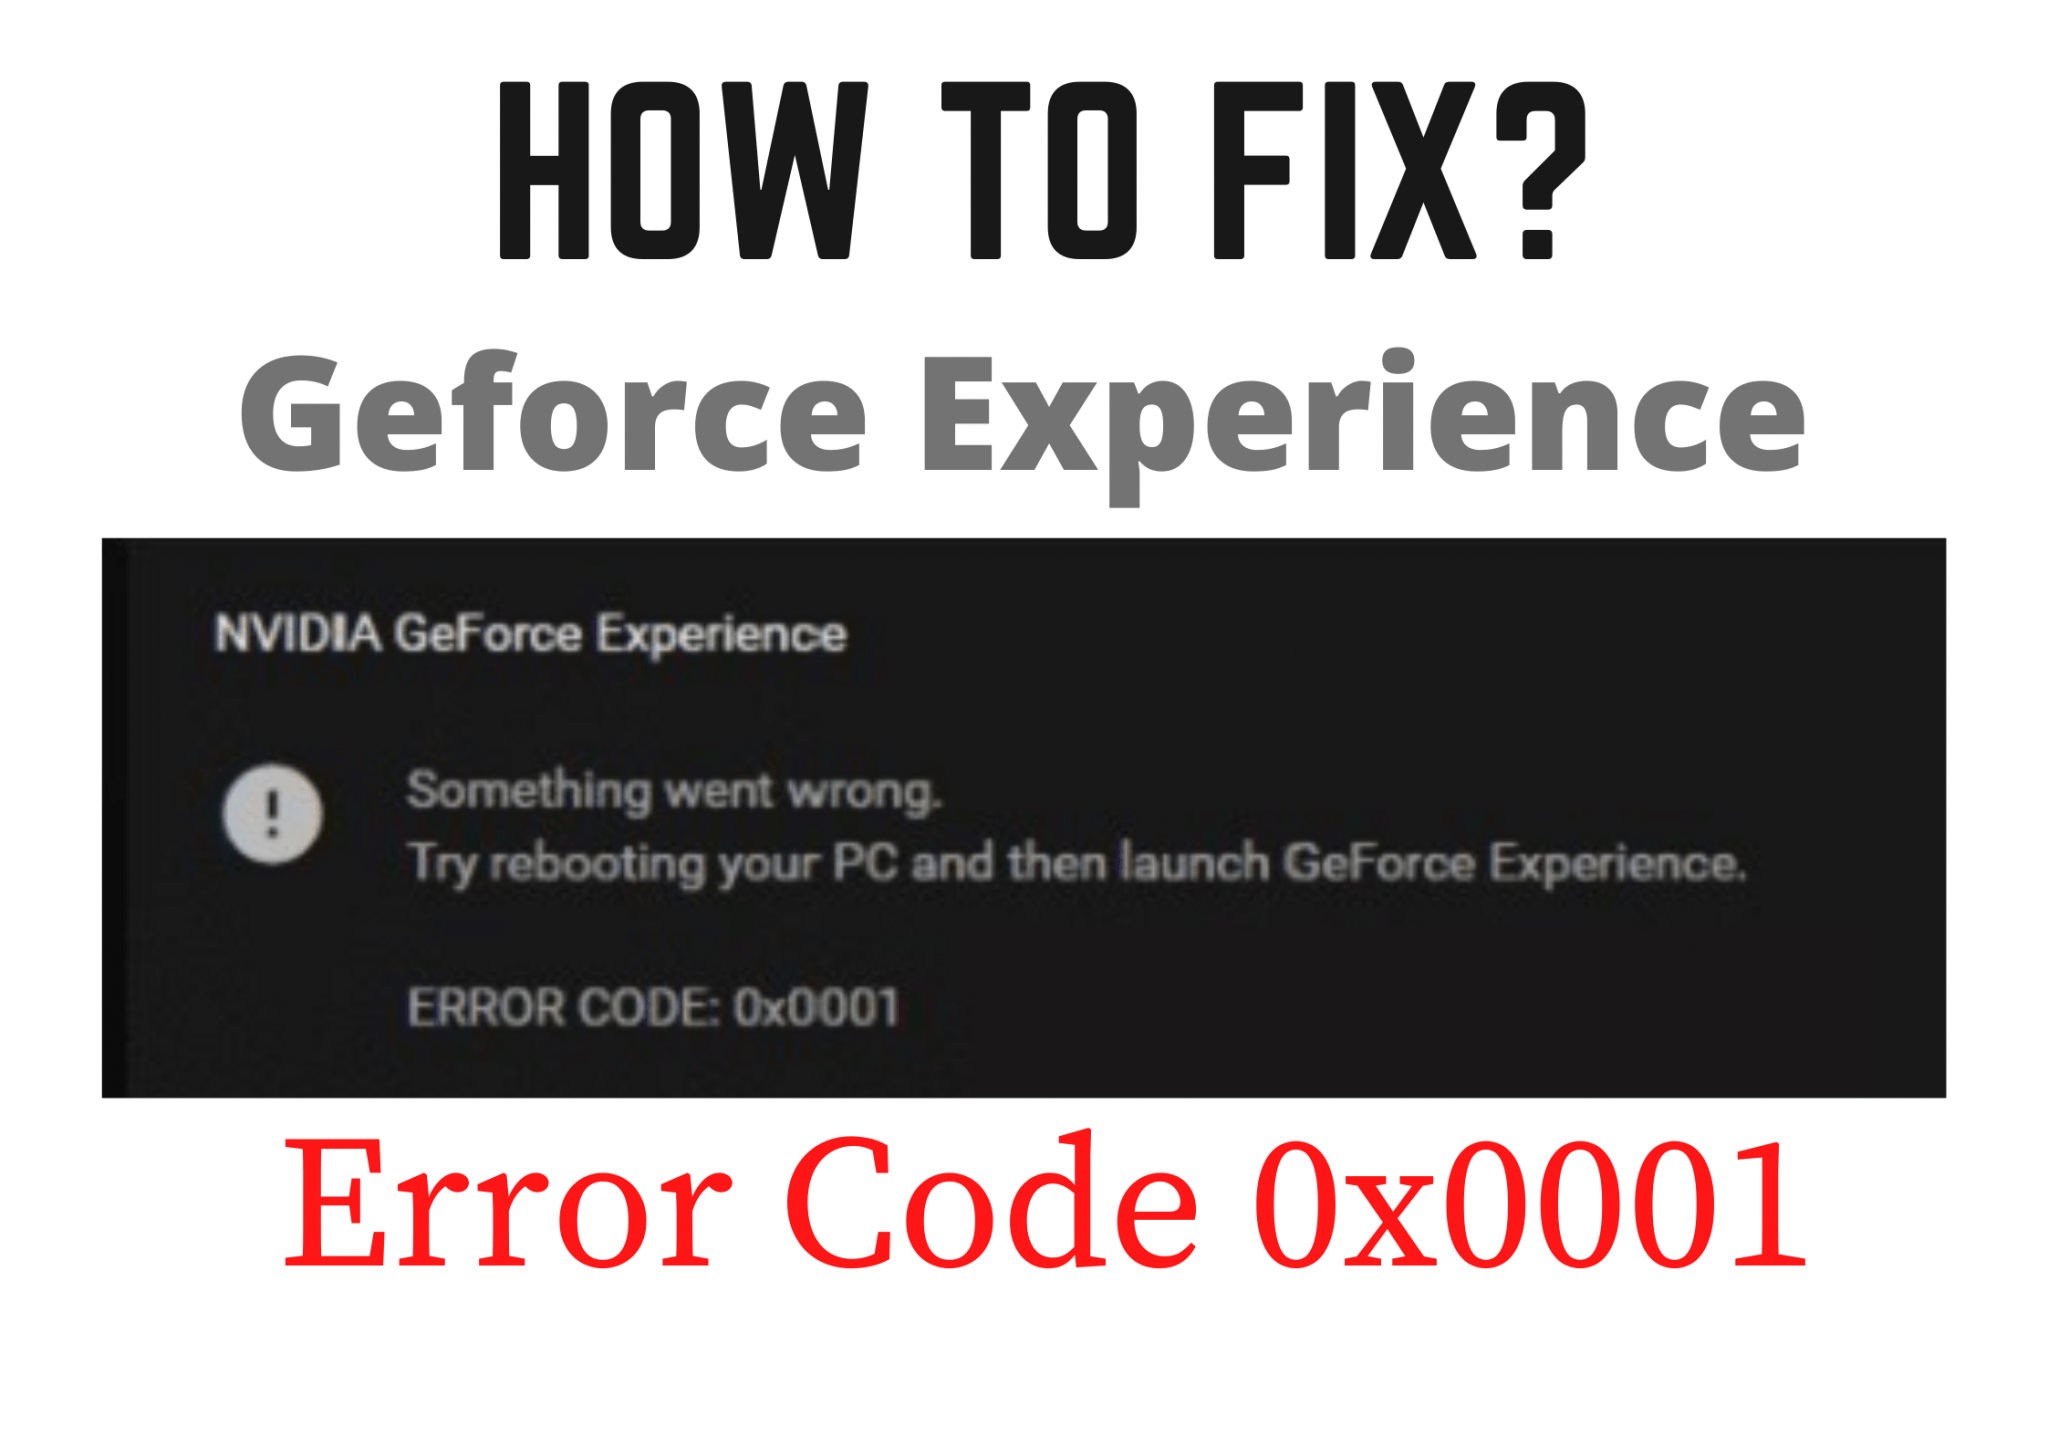 Geforce experience error code. Ошибка запуска GEFORCE experience something went wrong. NVIDIA GEFORCE experience something went wrong. Try rebooting your PC and then Launch GEFORCE experience. Error code: 0x0003. True rebooting your PC and then Launch GEFORCE experience. An Unknown Error has occurred NVIDIA GEFORCE Now.